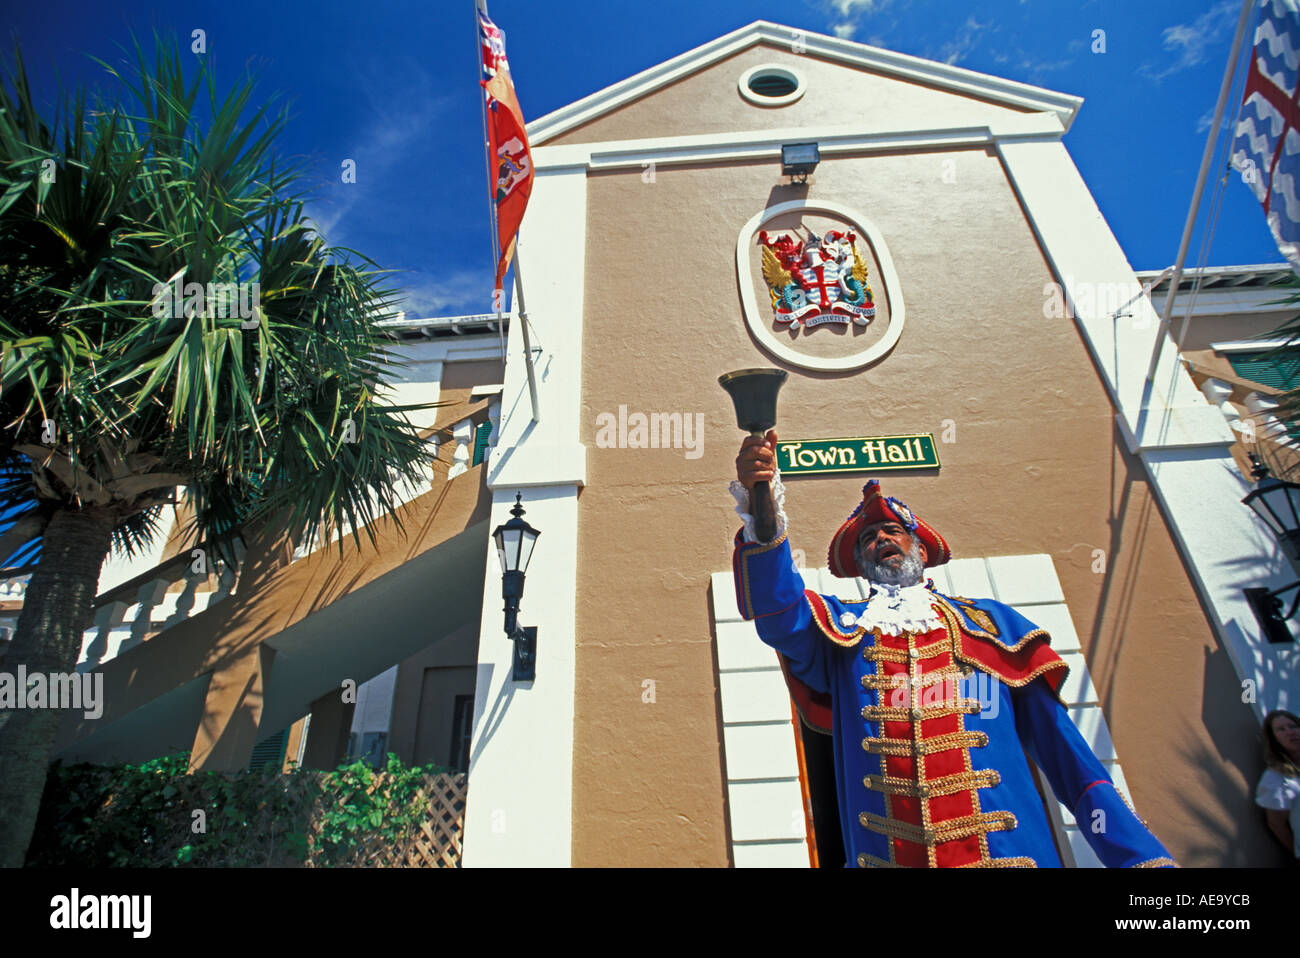 in-the-town-of-st-george-bermuda-the-tow